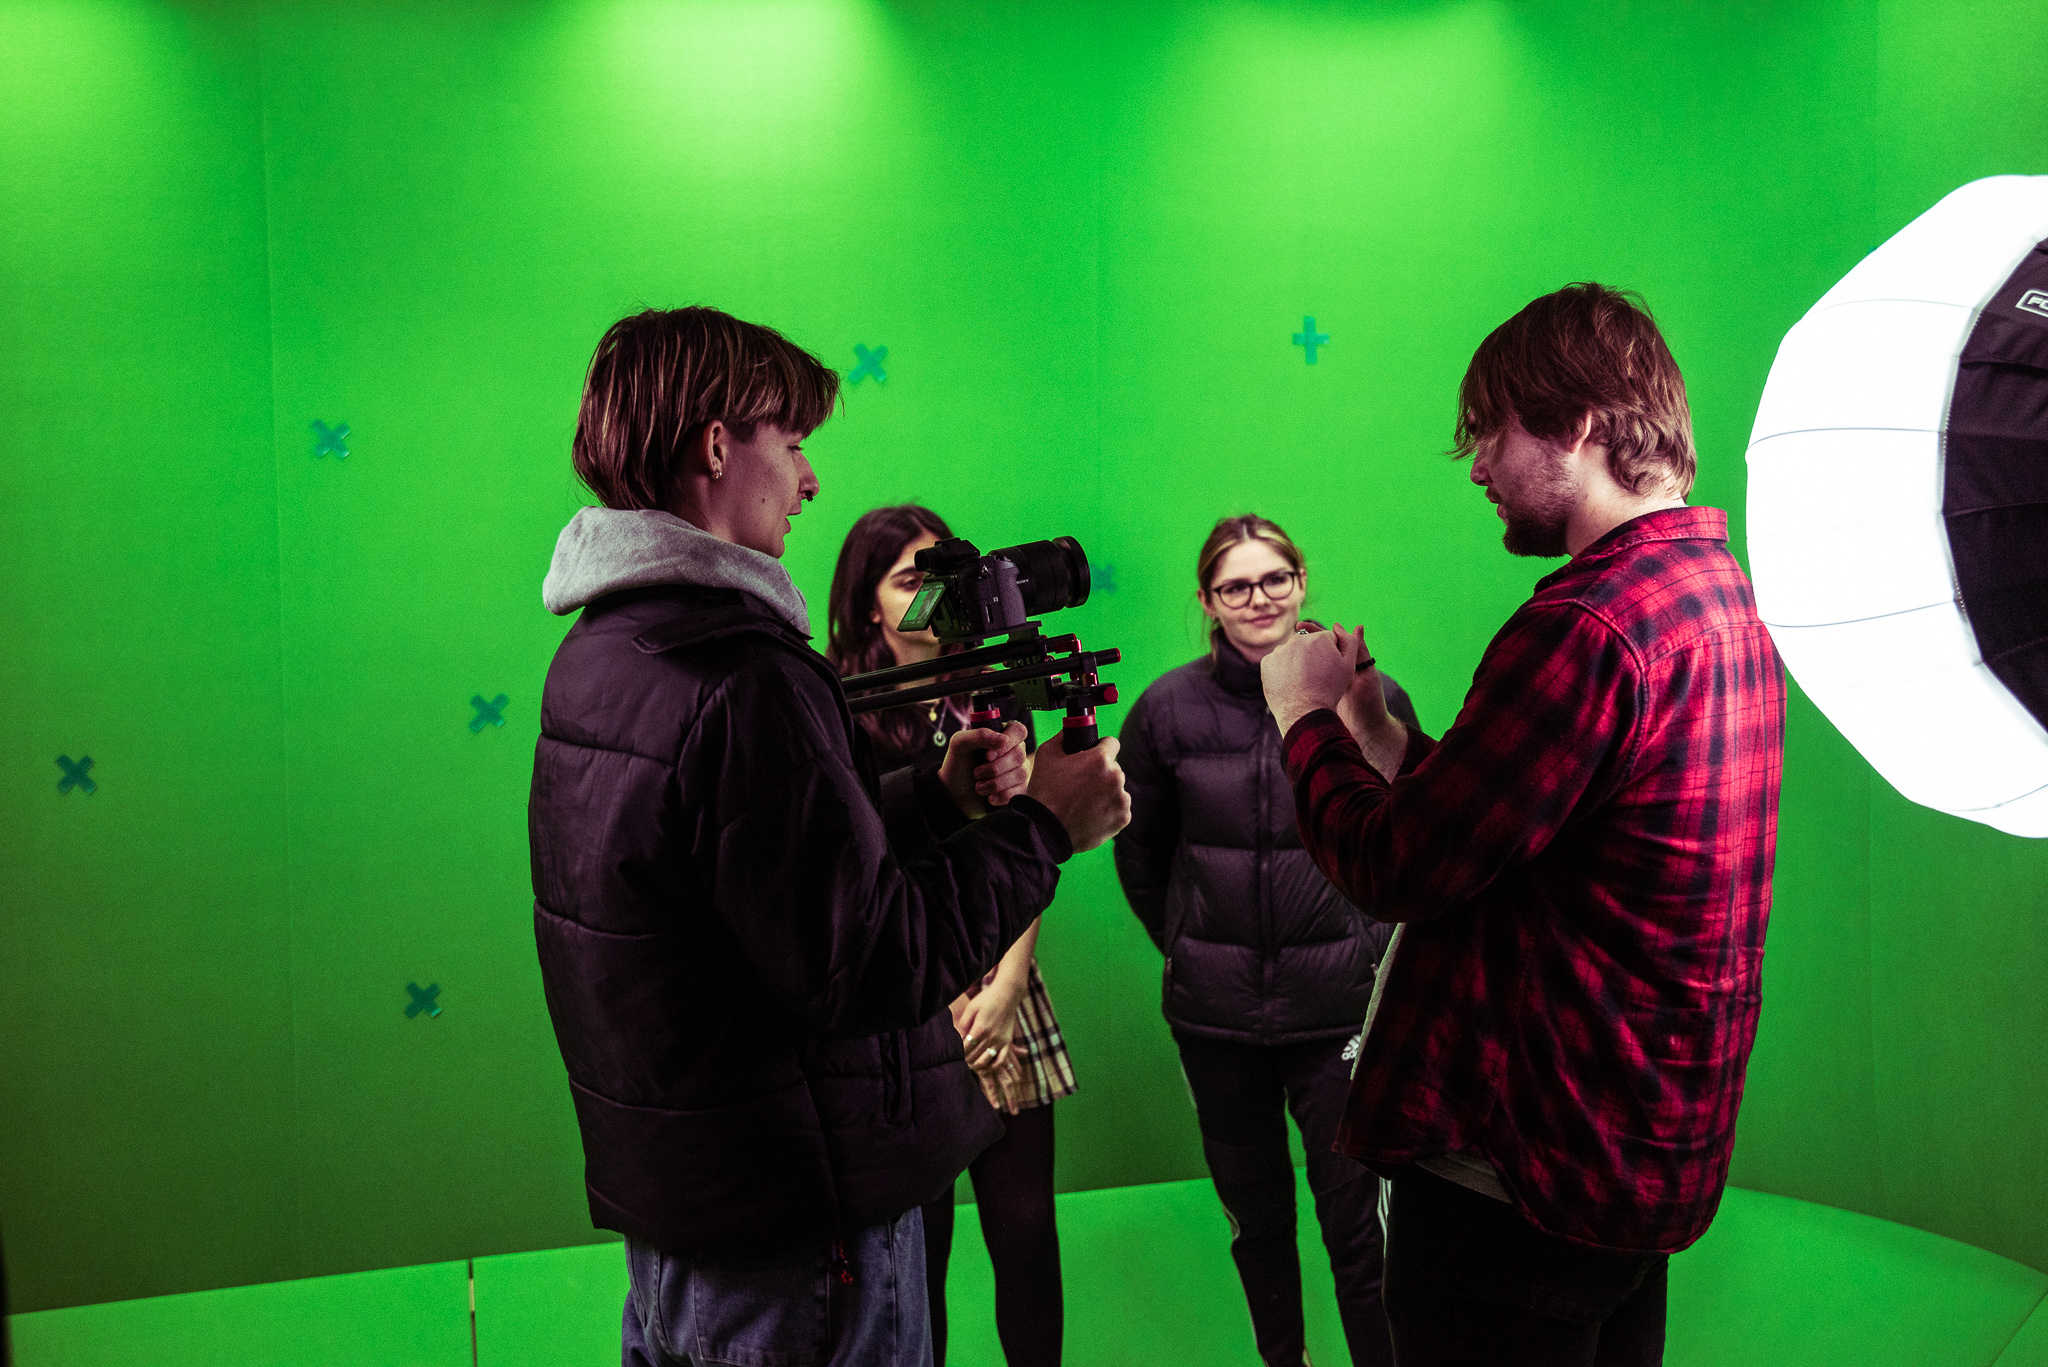 Film students in Bristol, with green screen behind